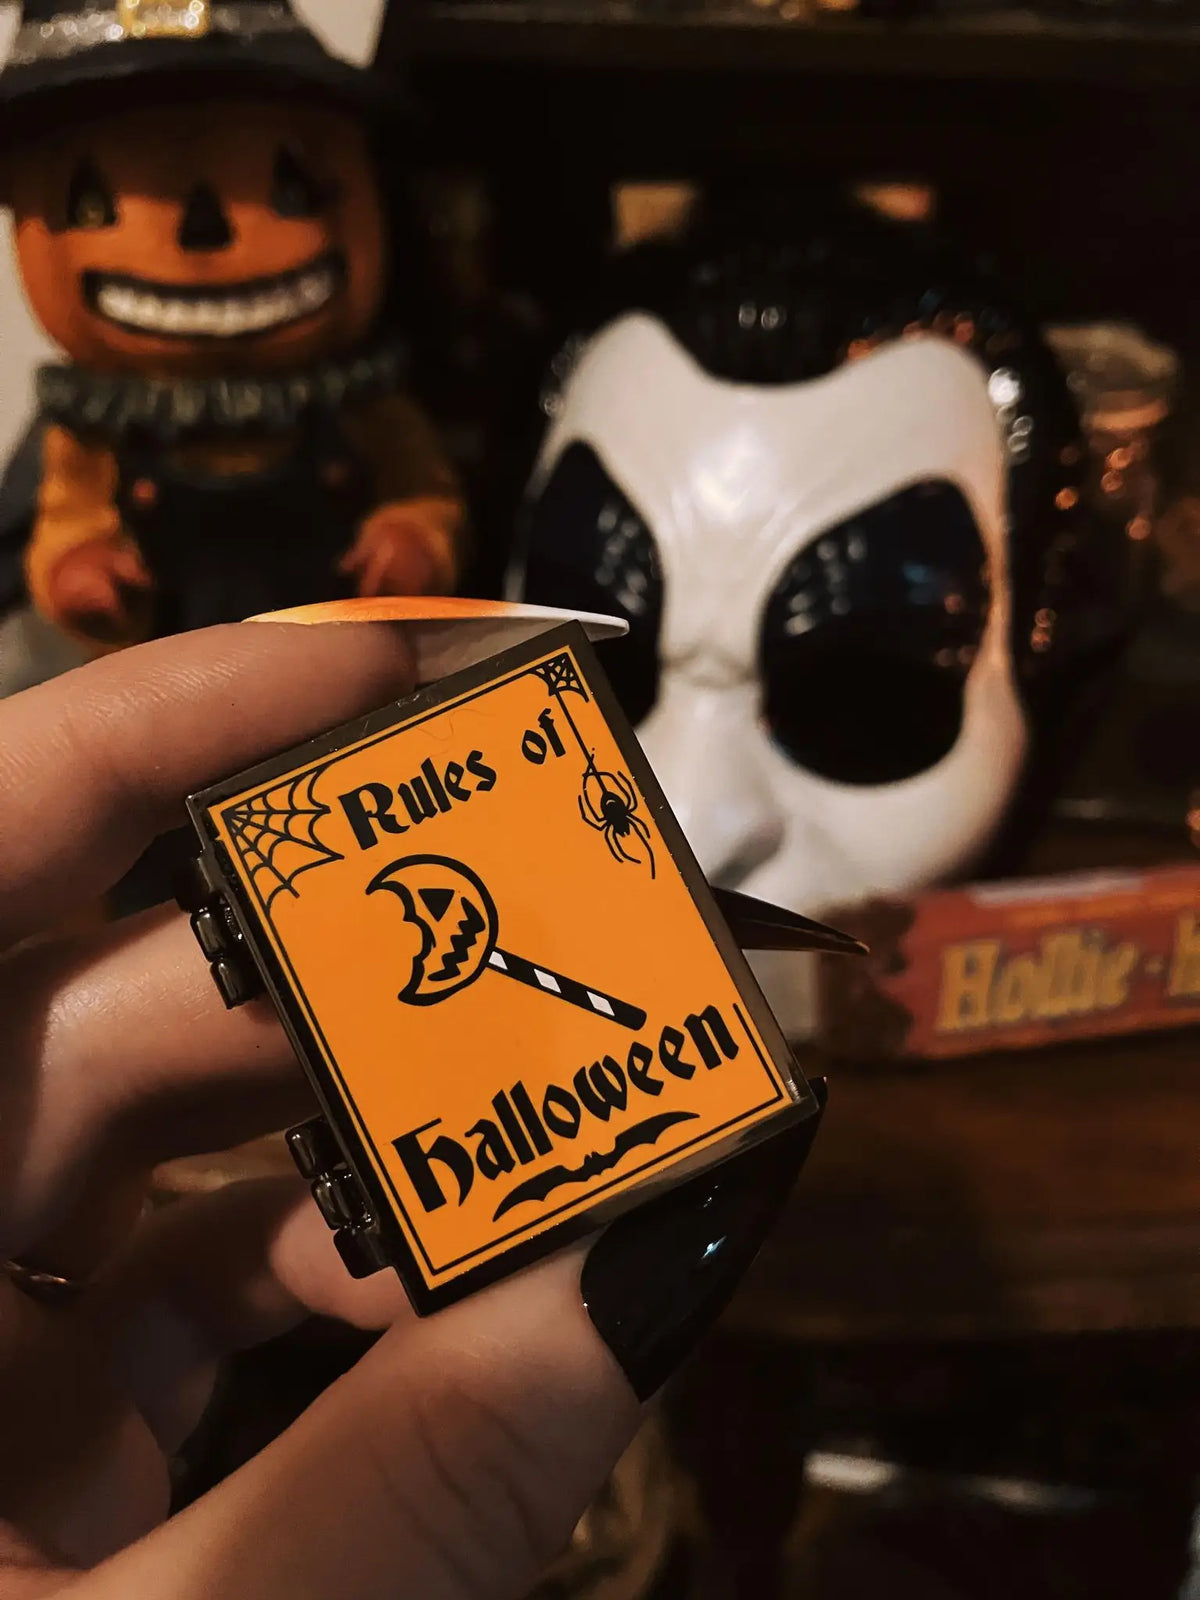 The Rules of Halloween - "Trick 'r Treat" Hinged Book Pin